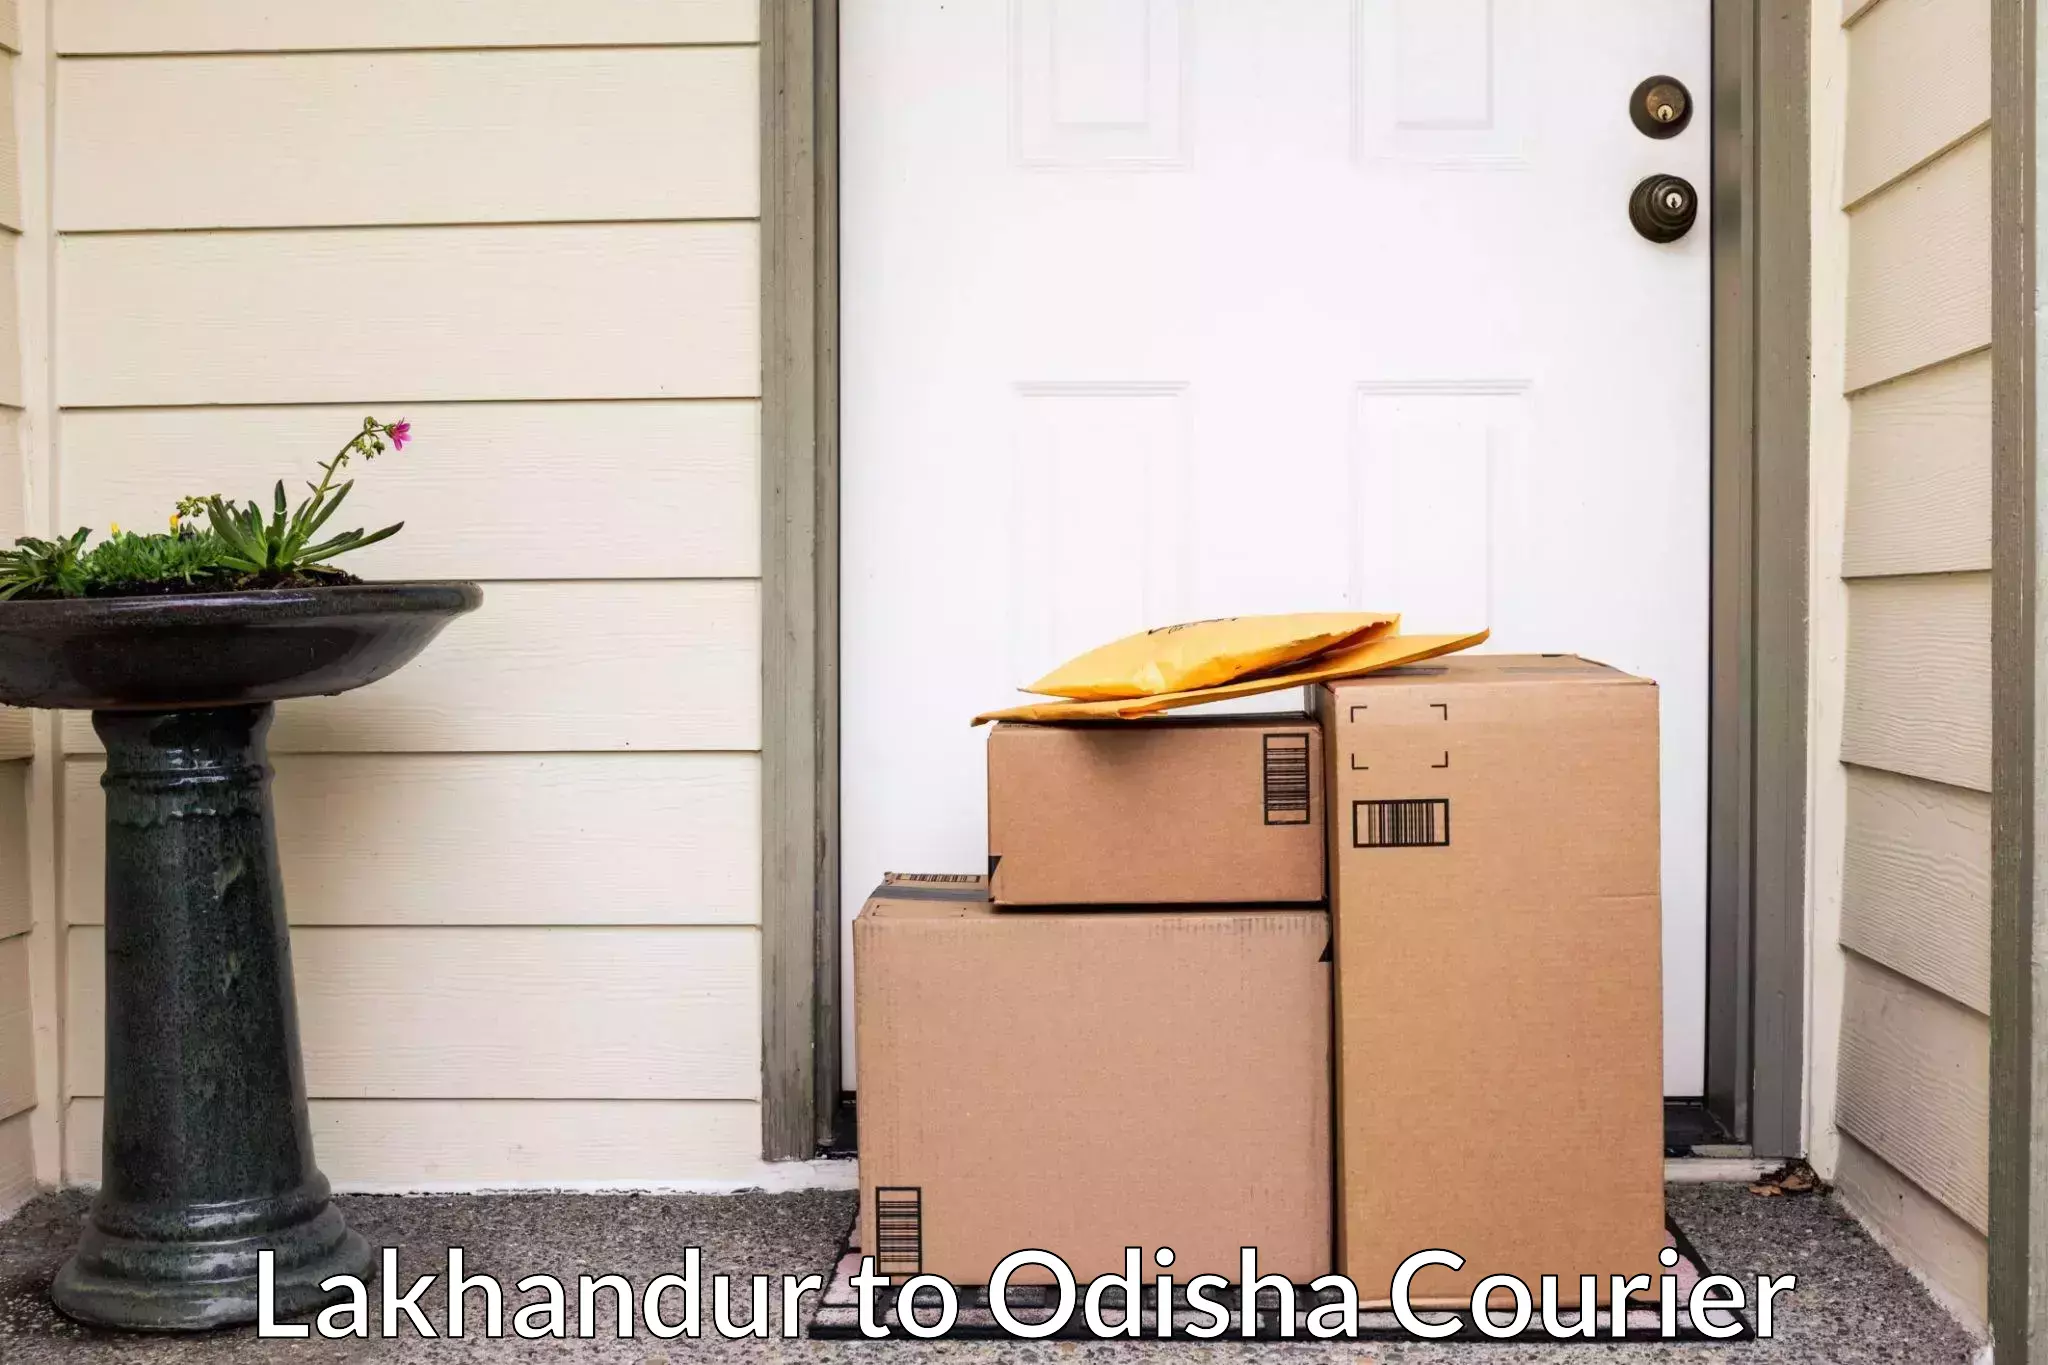 Trusted relocation experts Lakhandur to Nabarangpur